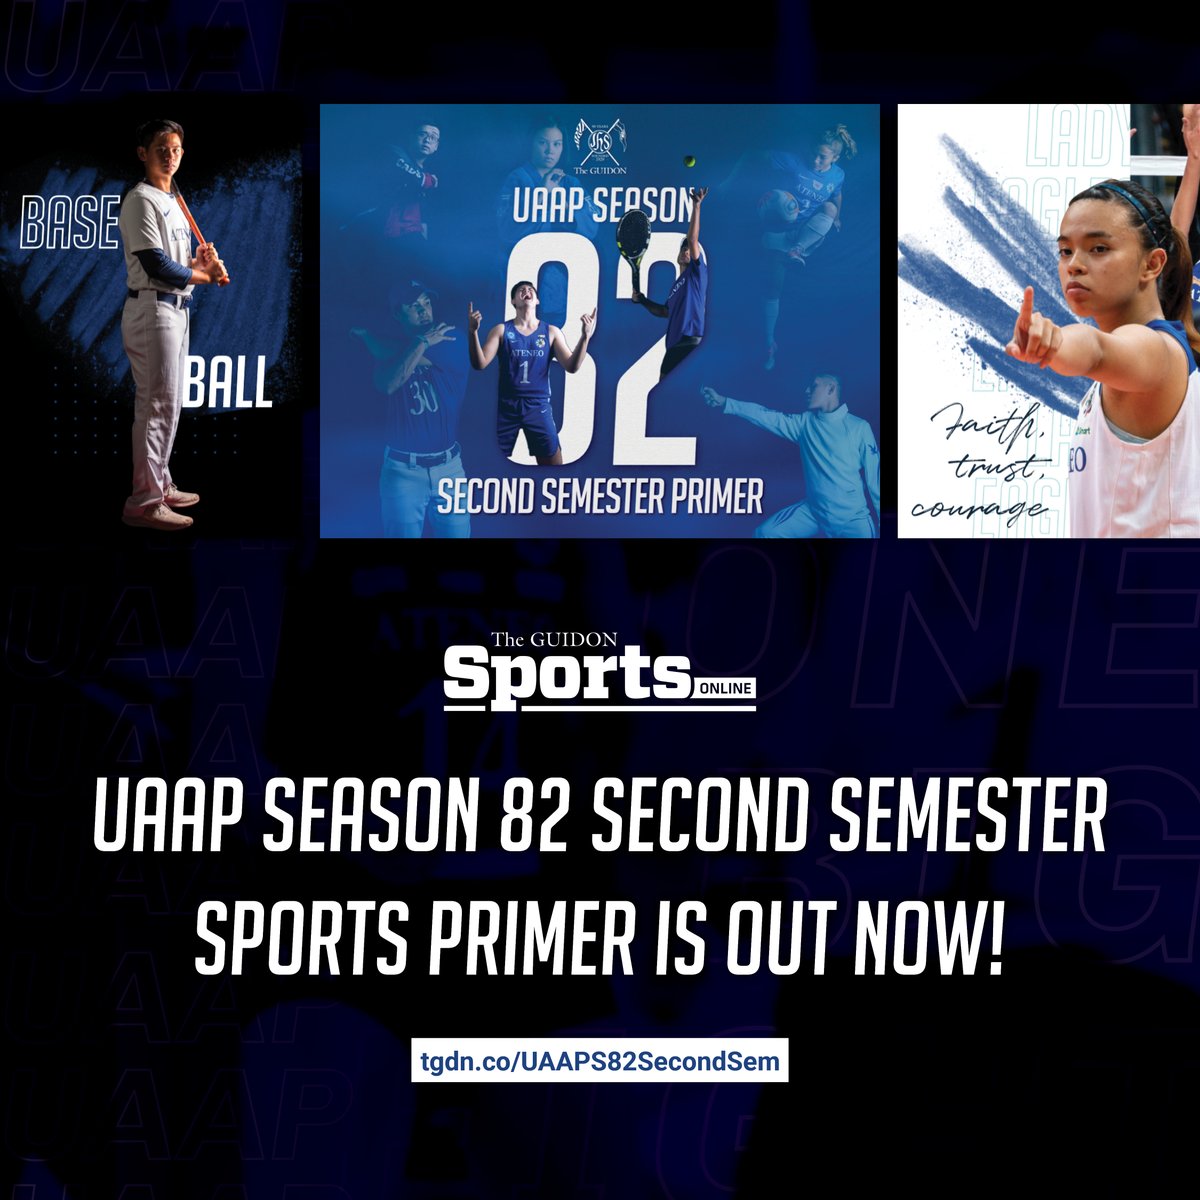 OUT NOW: Despite the cancellation of UAAP Season 82, the stories of the second semester Ateneo teams still deserve to be heard. Check out The GUIDON Sports UAAP Season 82 Second Semester Primer here: tgdn.co/UAAPS82SecondS…